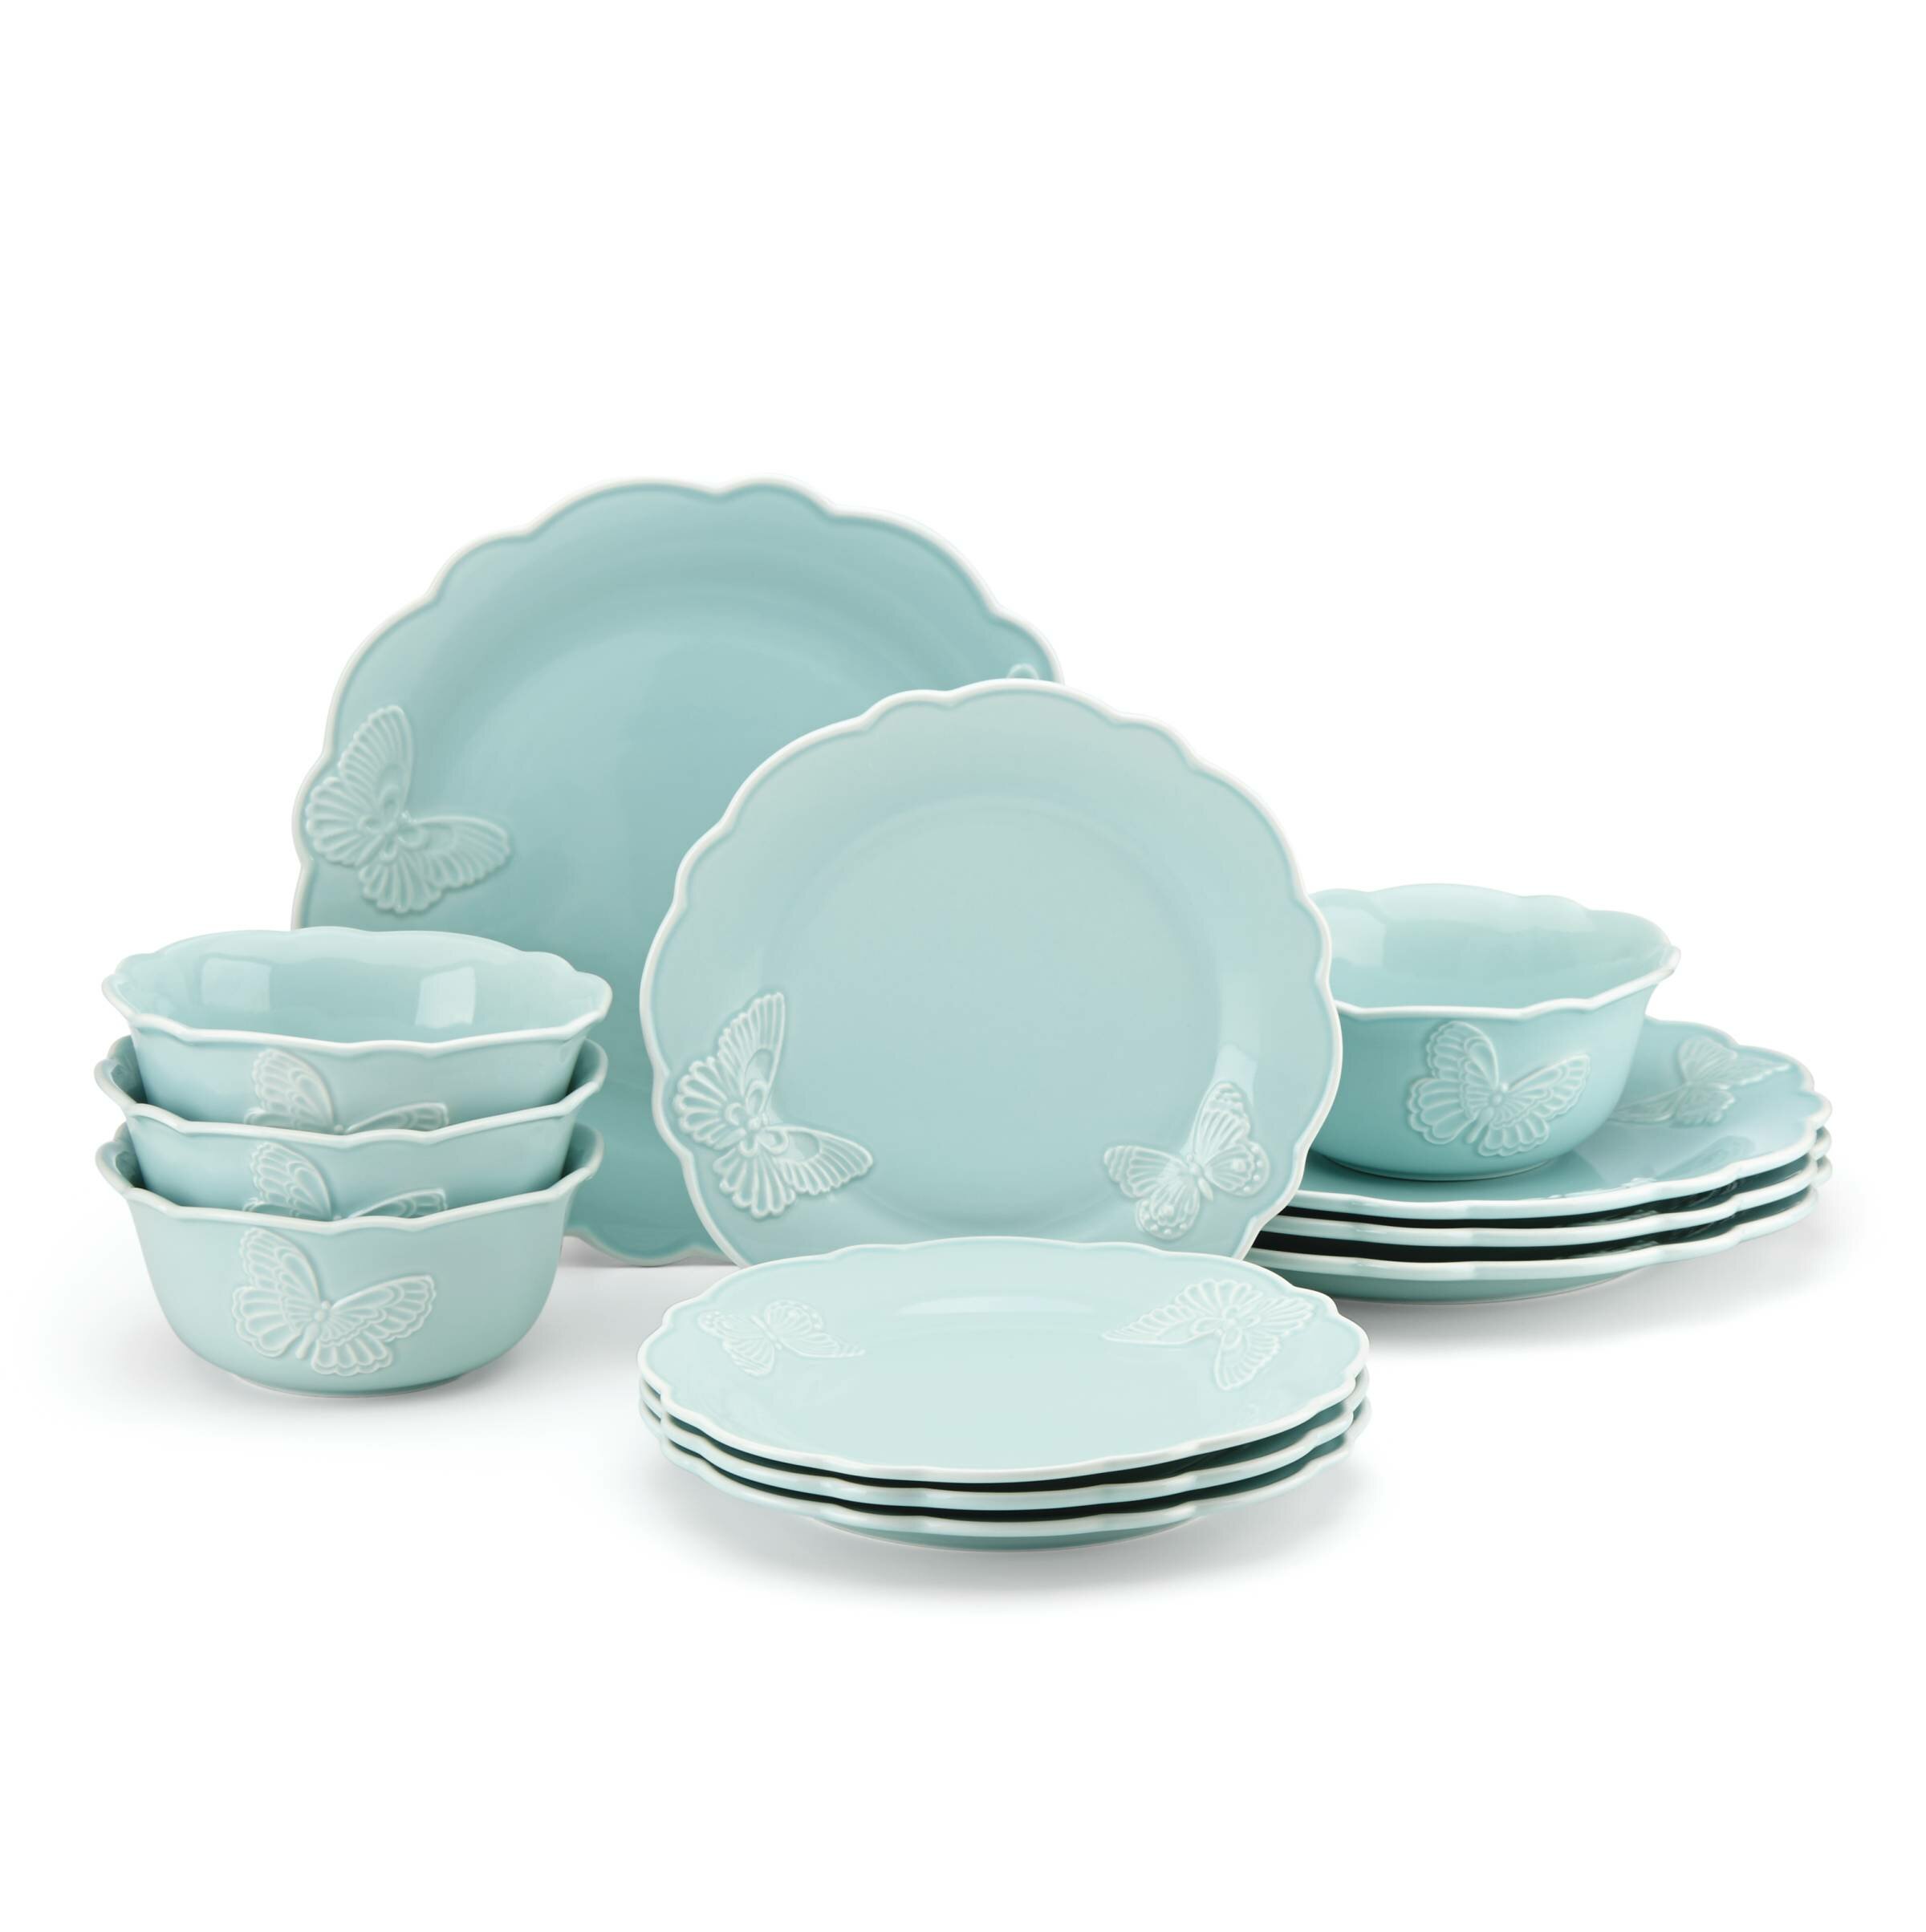 Lenox Butterfly Meadow Carved 12 Piece Dinnerware Set, Service for 4